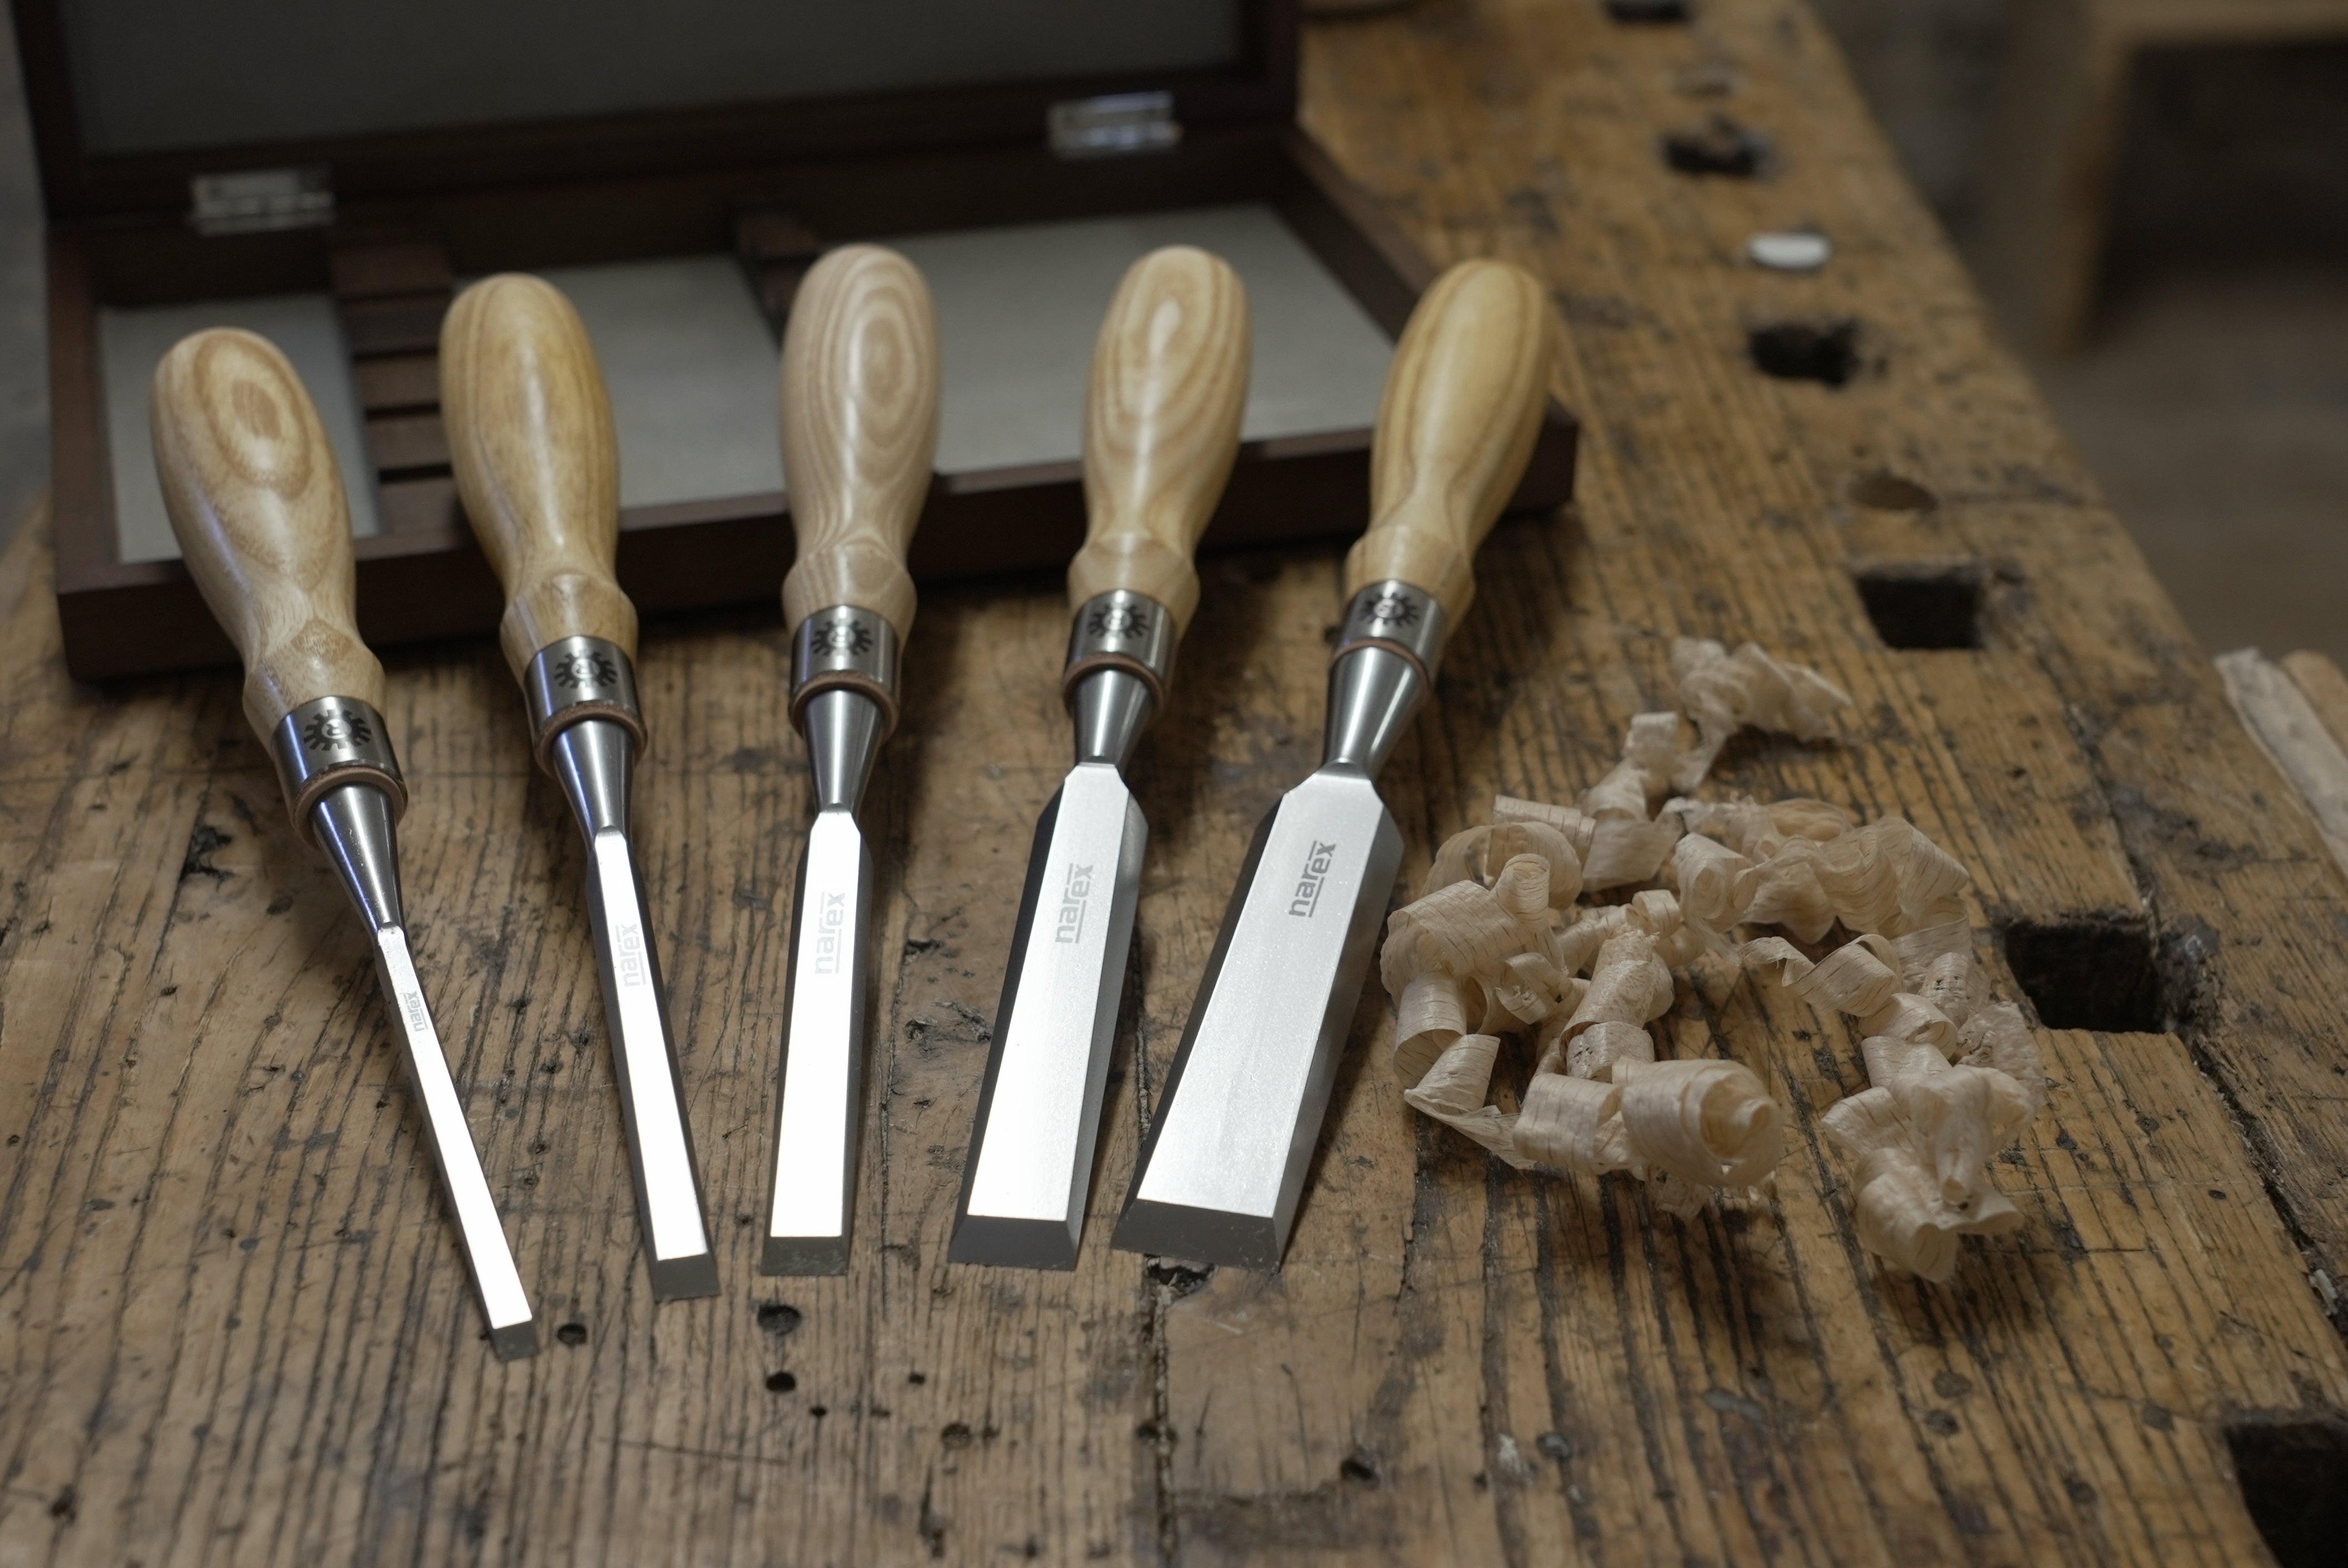 Set of Bevel Edge Chisels 5Pce RICHTER (6mm (1/4"), 10mm (3/8"), 13mm (1/2"), 19mm (3/4"), 25mm(1")) 853600 by Narex